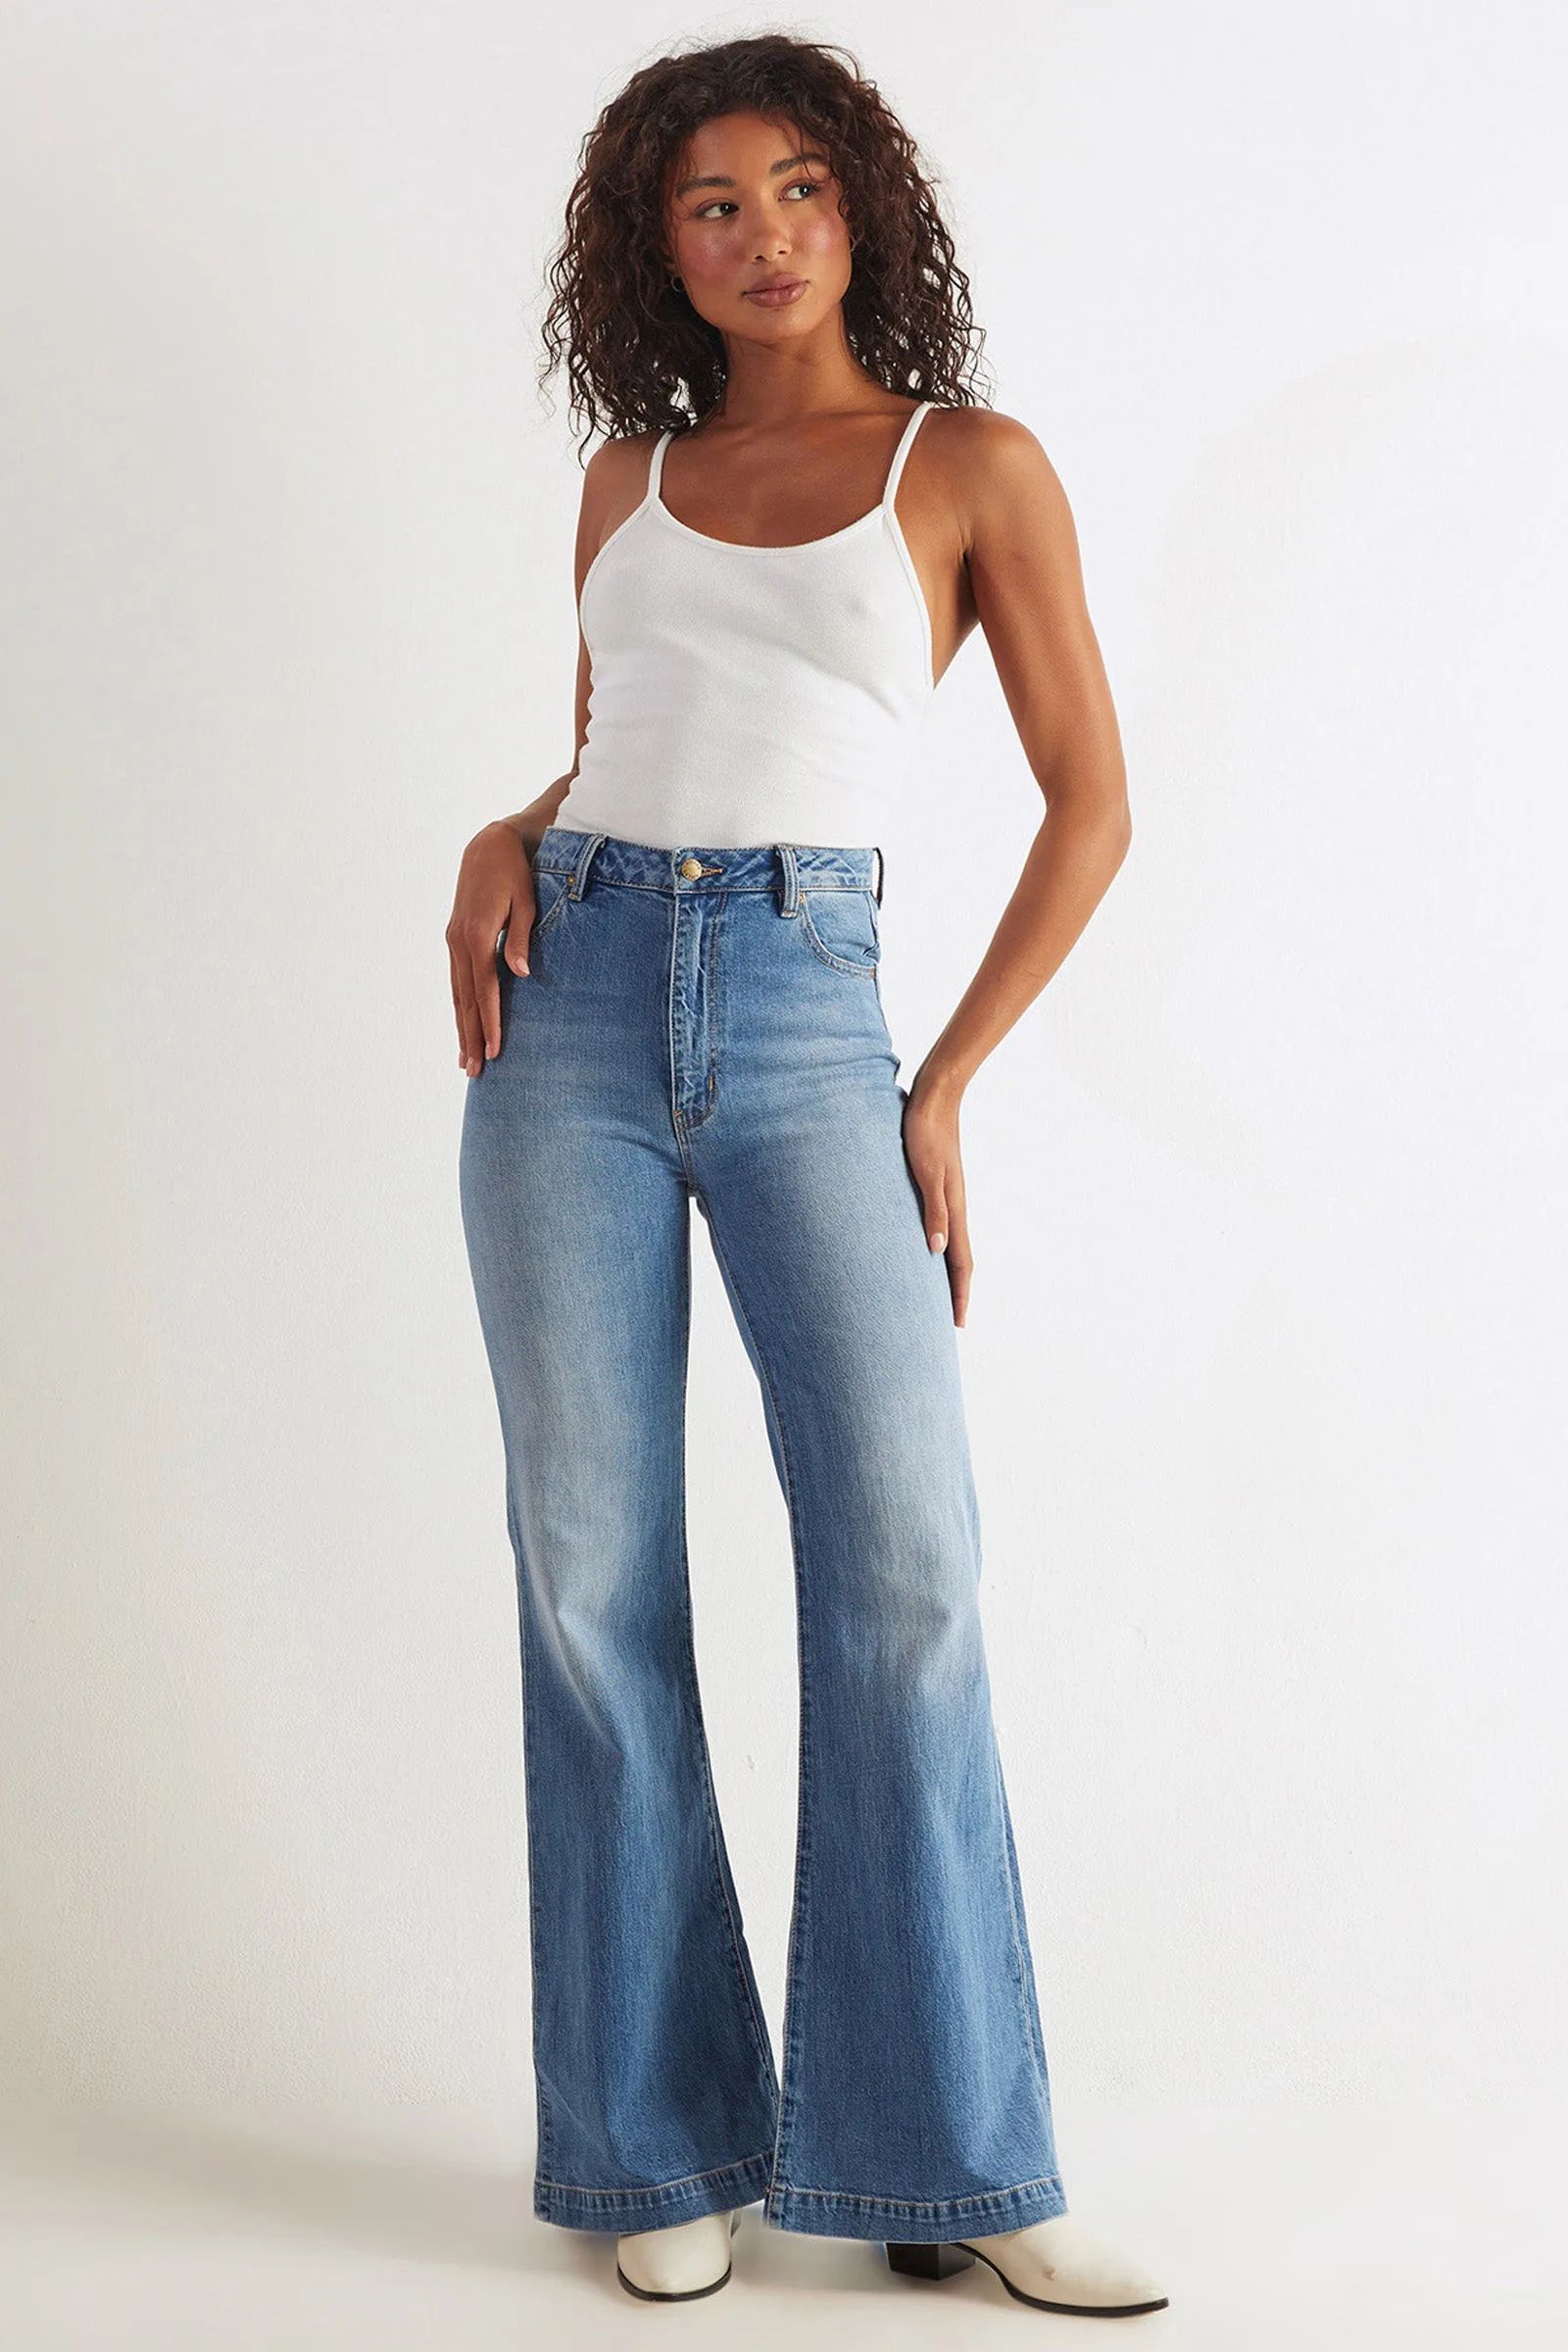 Eastcoast Flare - Karen Blue | Rolla's Jeans US/CAN